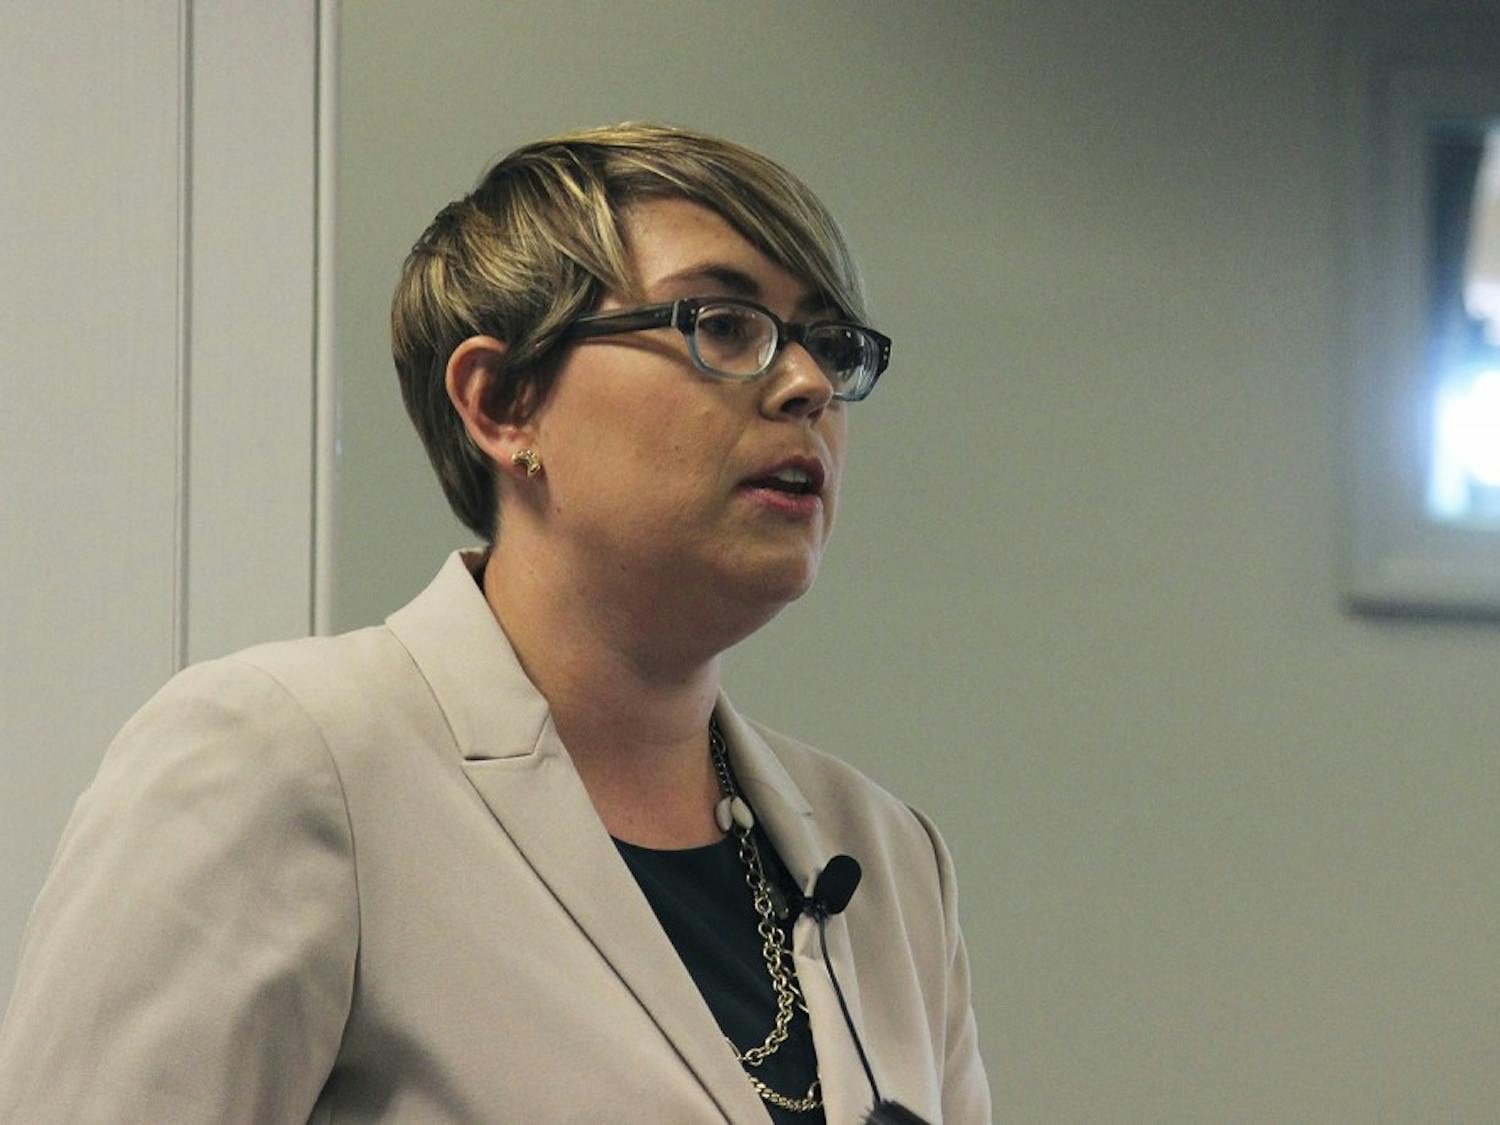 Cordelia Heaney, a candidate for director of the Carolina Women’s Center, presented her plan at a public forum Tuesday.